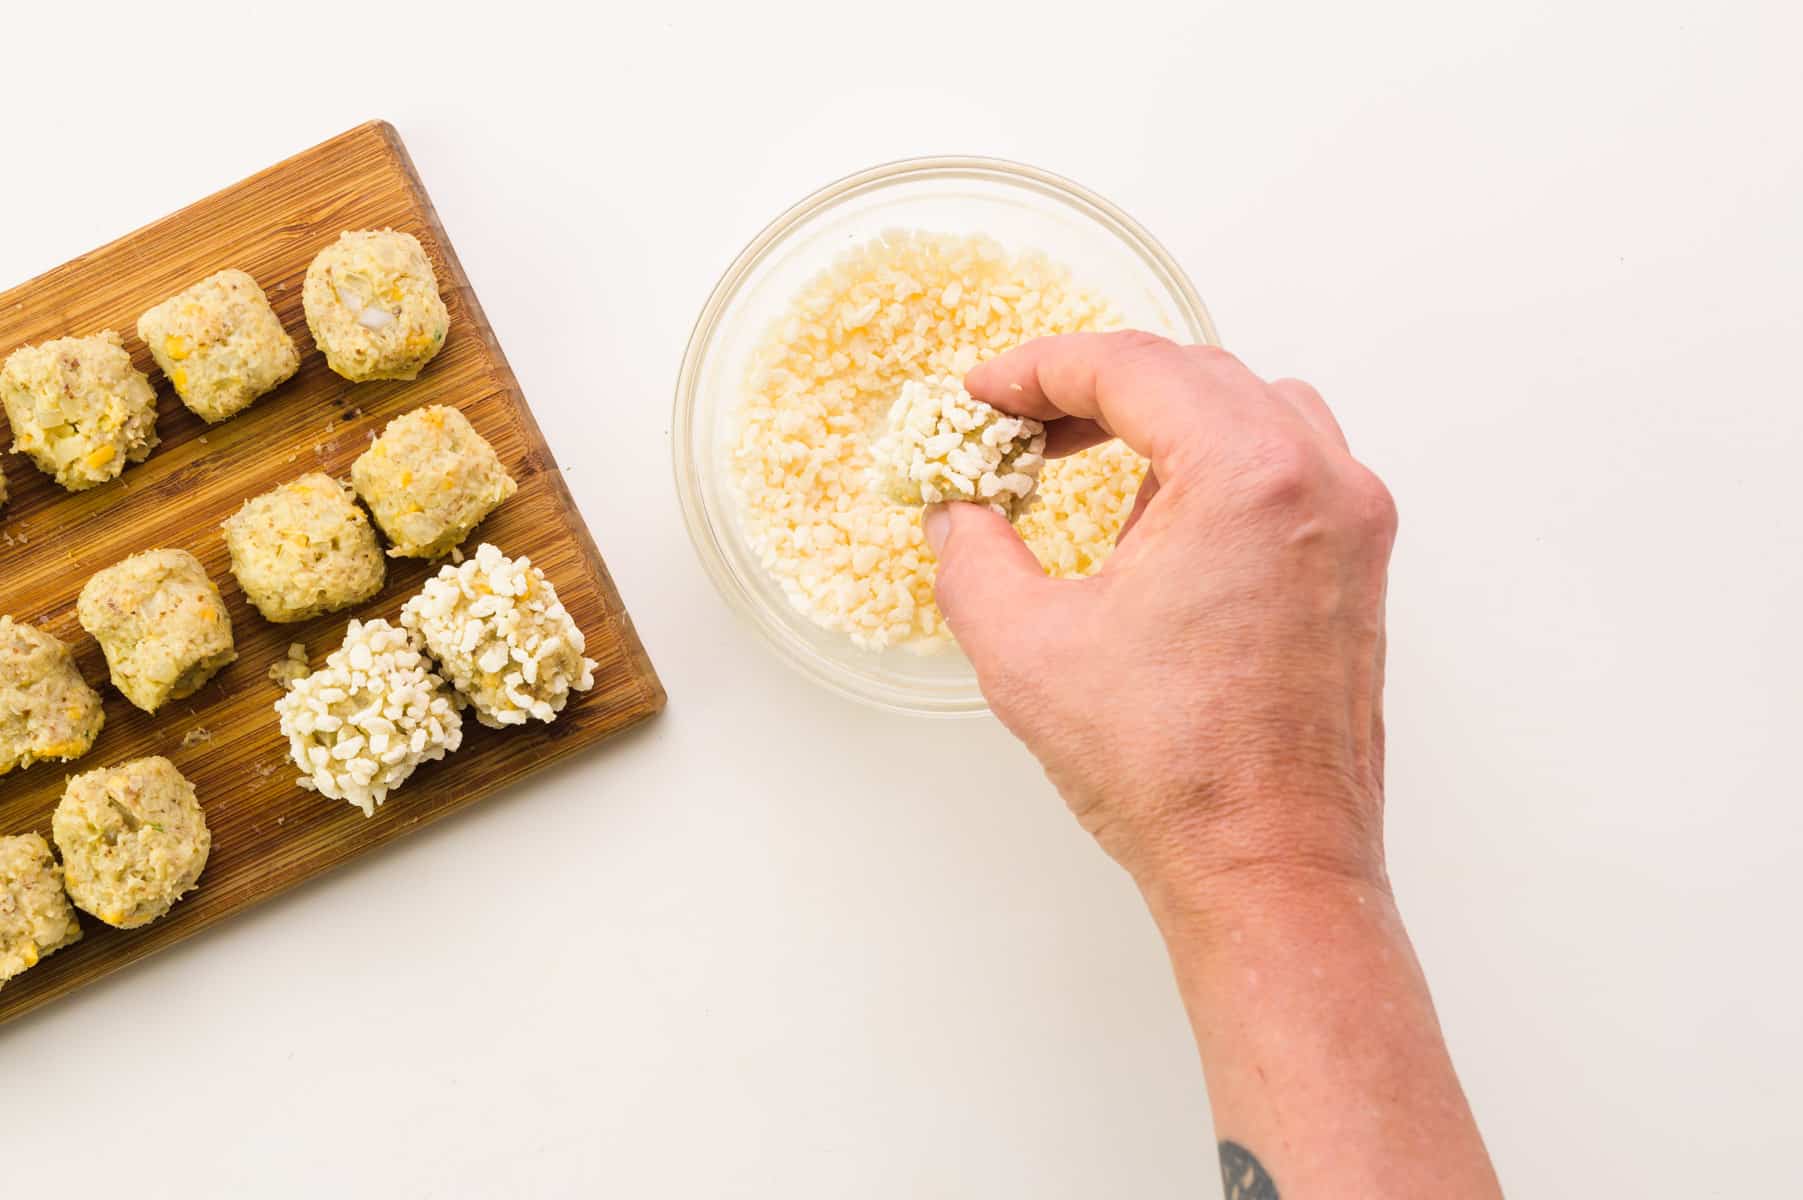 A hand rolls a cauliflower tot in bread crumbs. There is a cutting board with tots on the side.